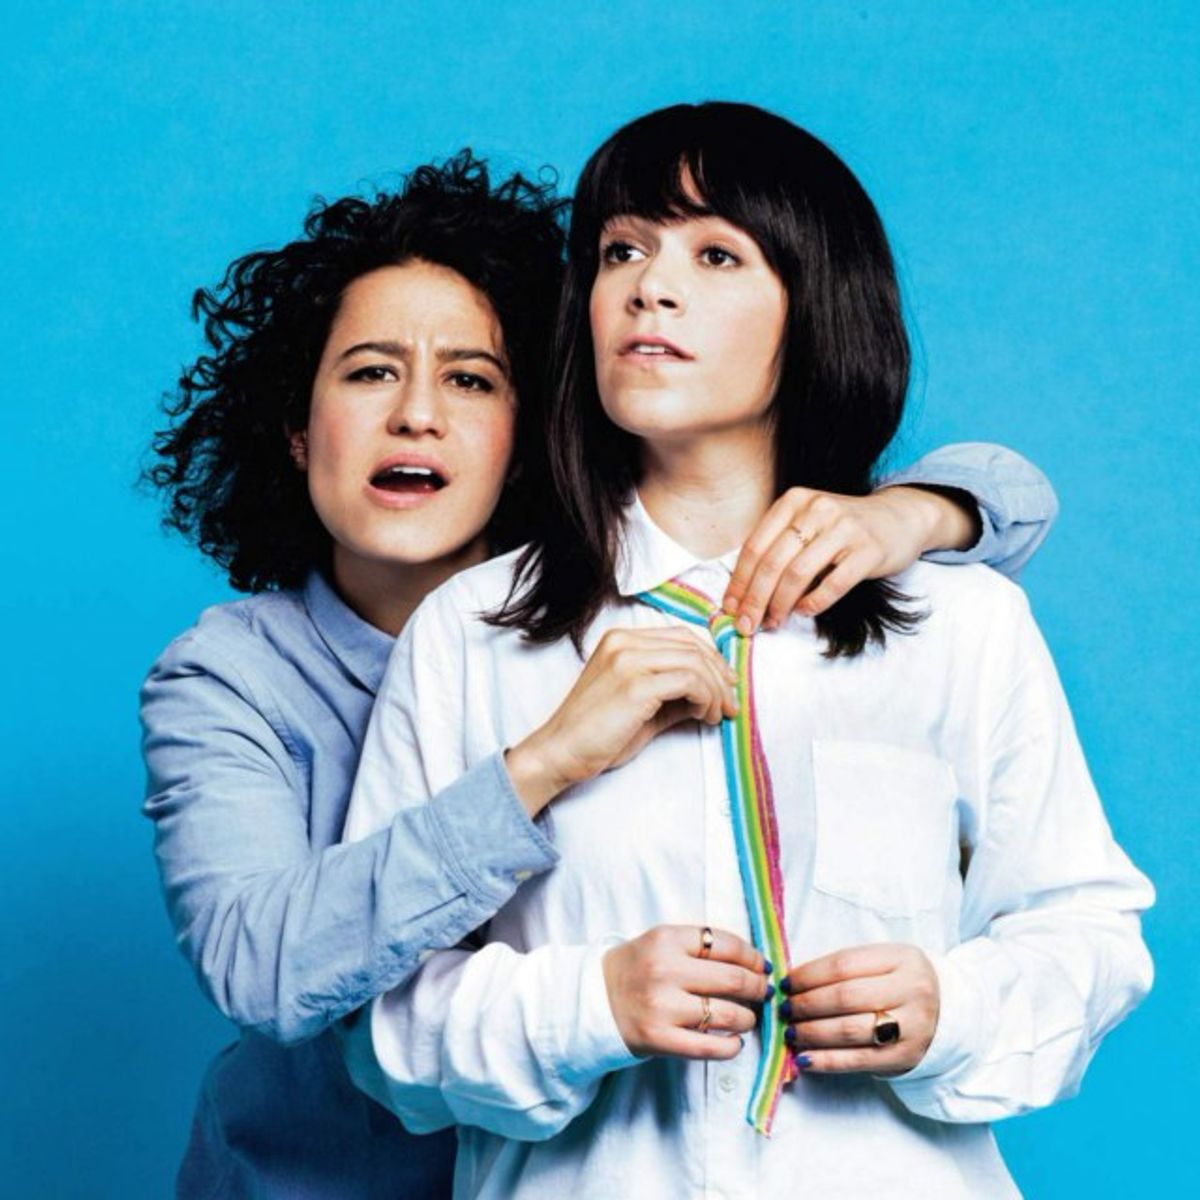 7 Reasons To Watch Broad City